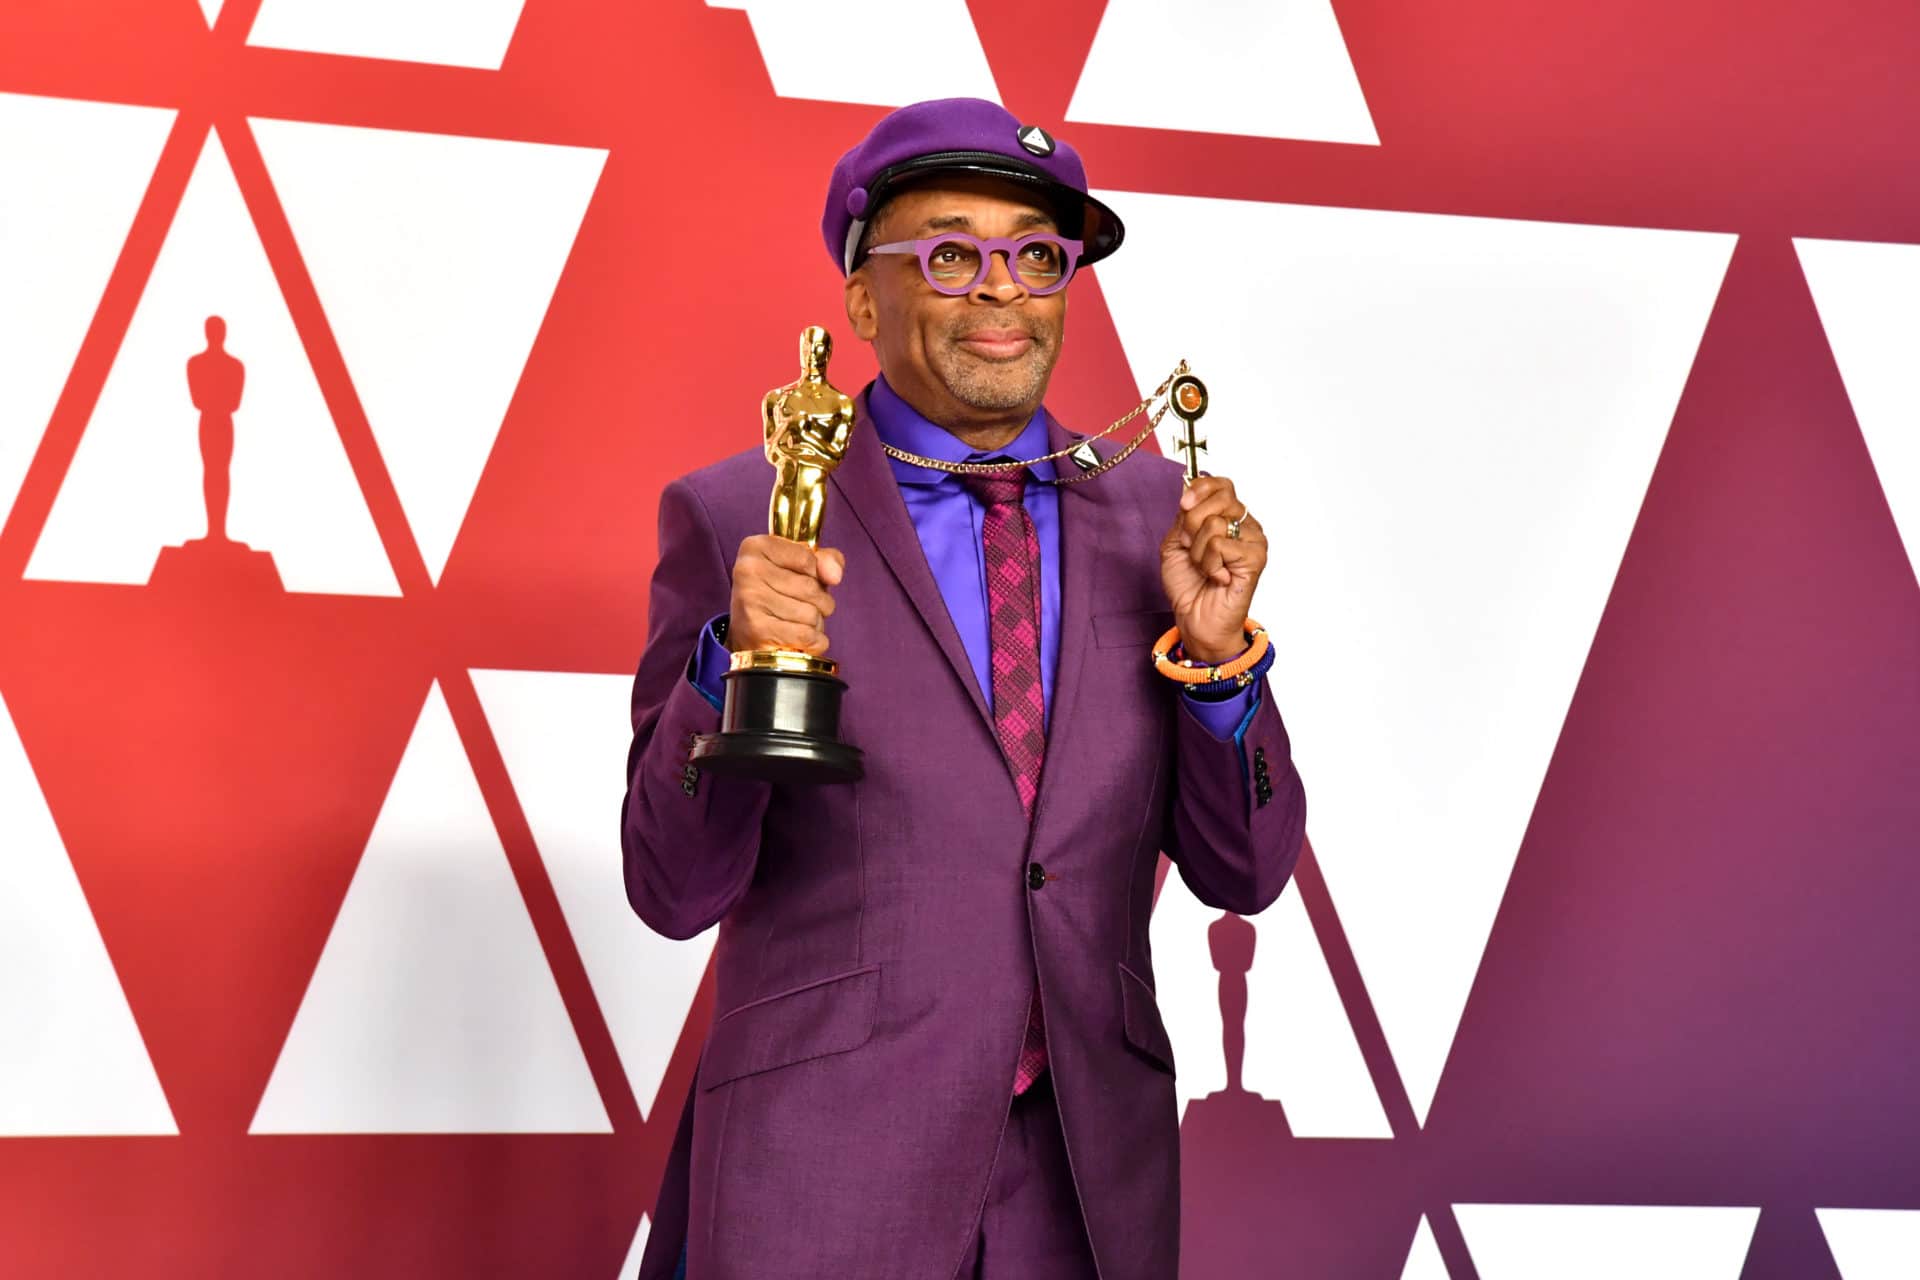 Spike Lee Said He’s Not Falling For Donald Trump’s Twitter Attack After Oscars Speech